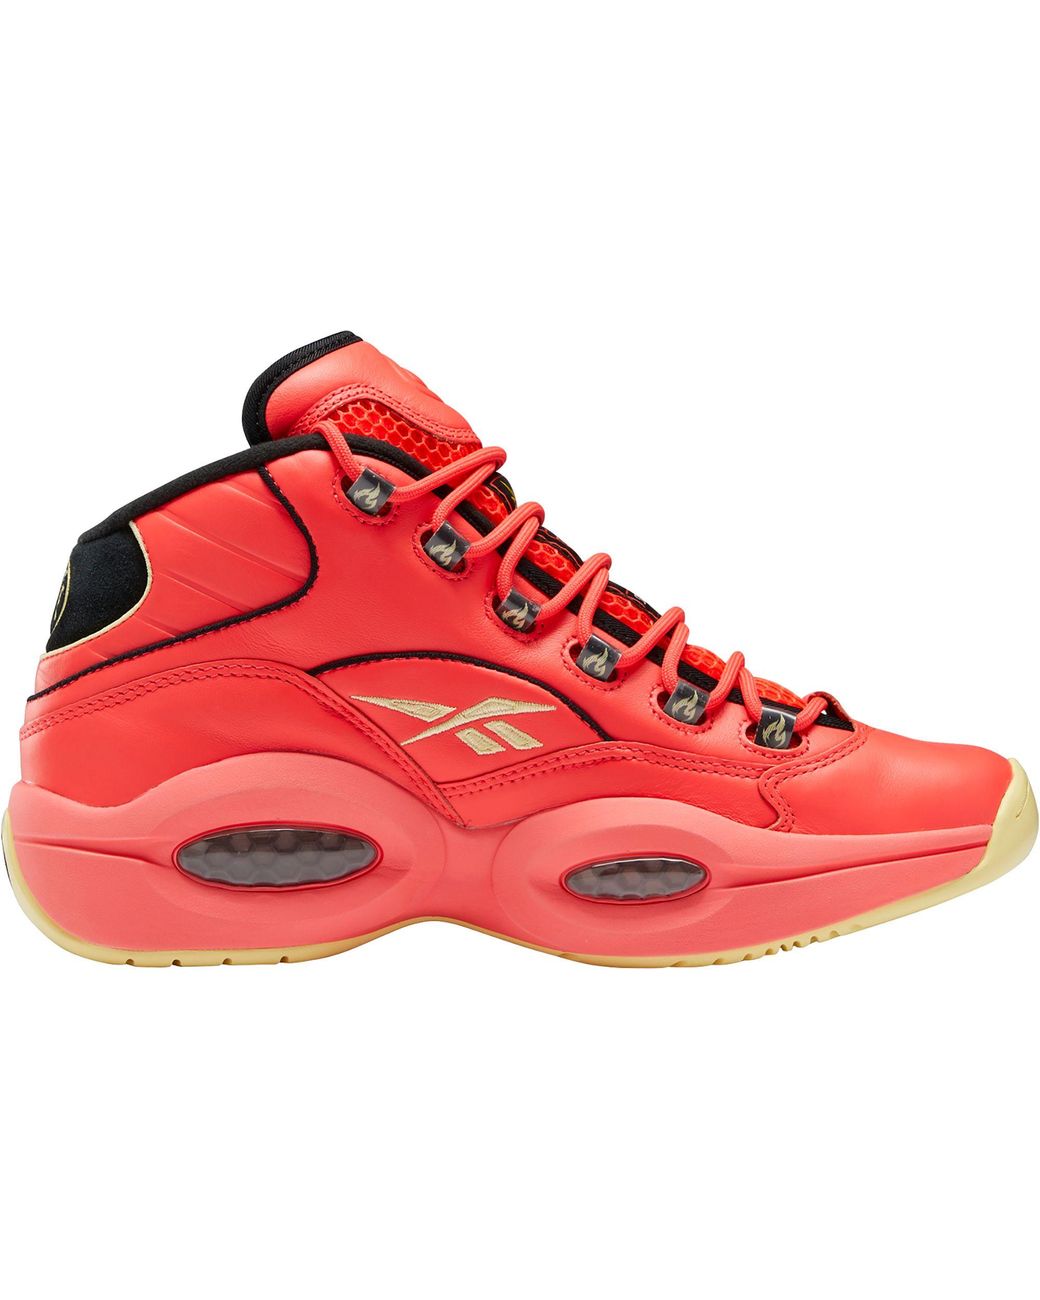 Reebok Leather Question Mid Basketball Shoes in Red/Black/Yellow (Red ...